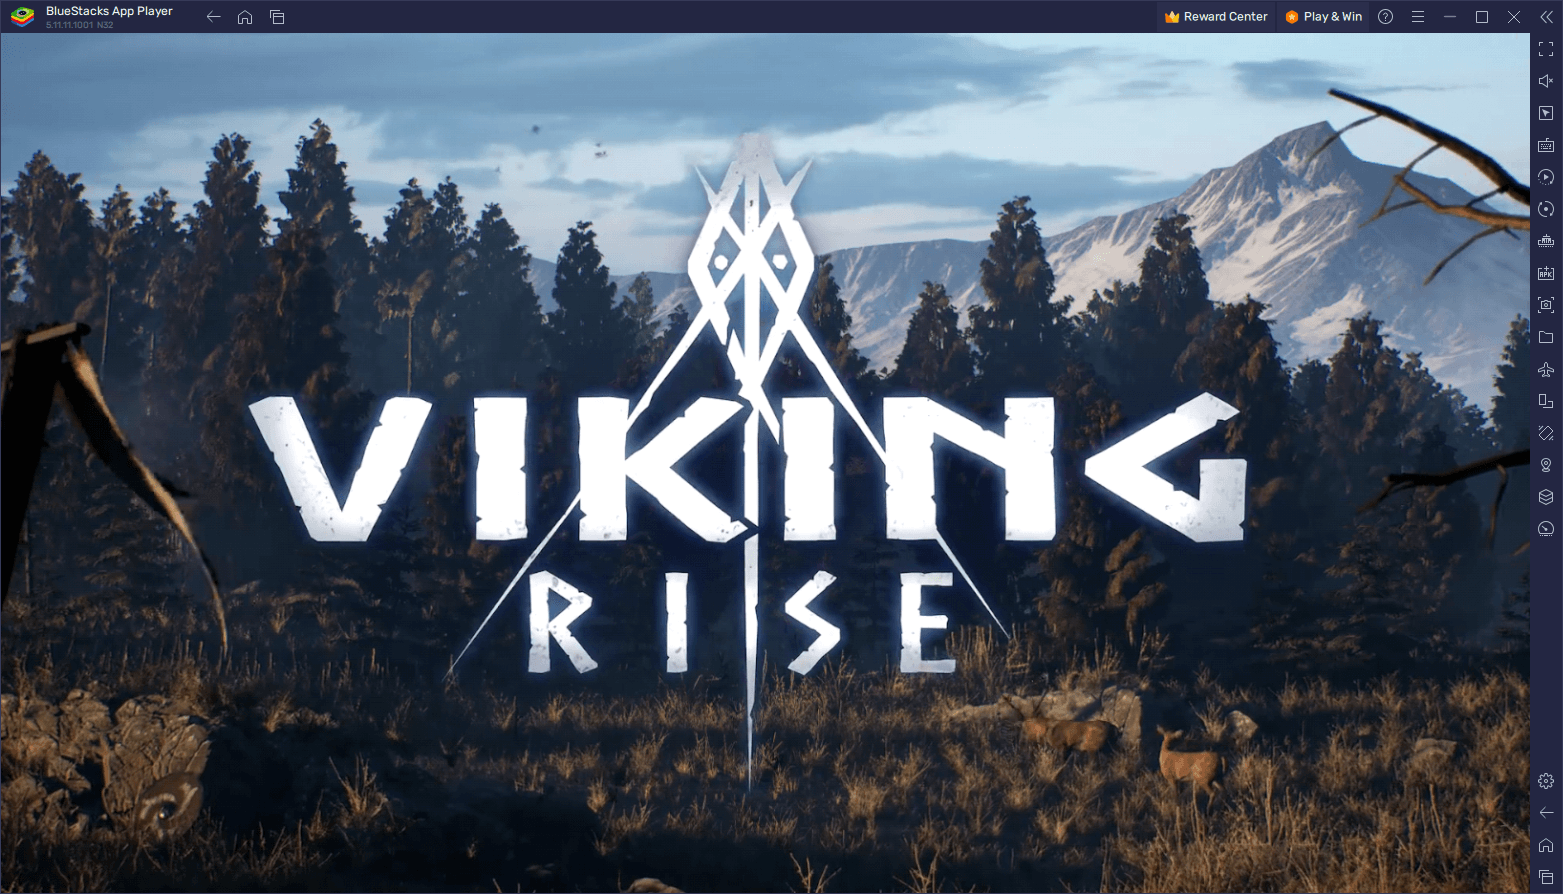 Viking Rise Review - A New Mobile Game with Stunning Graphics and Silky Smooth Performance